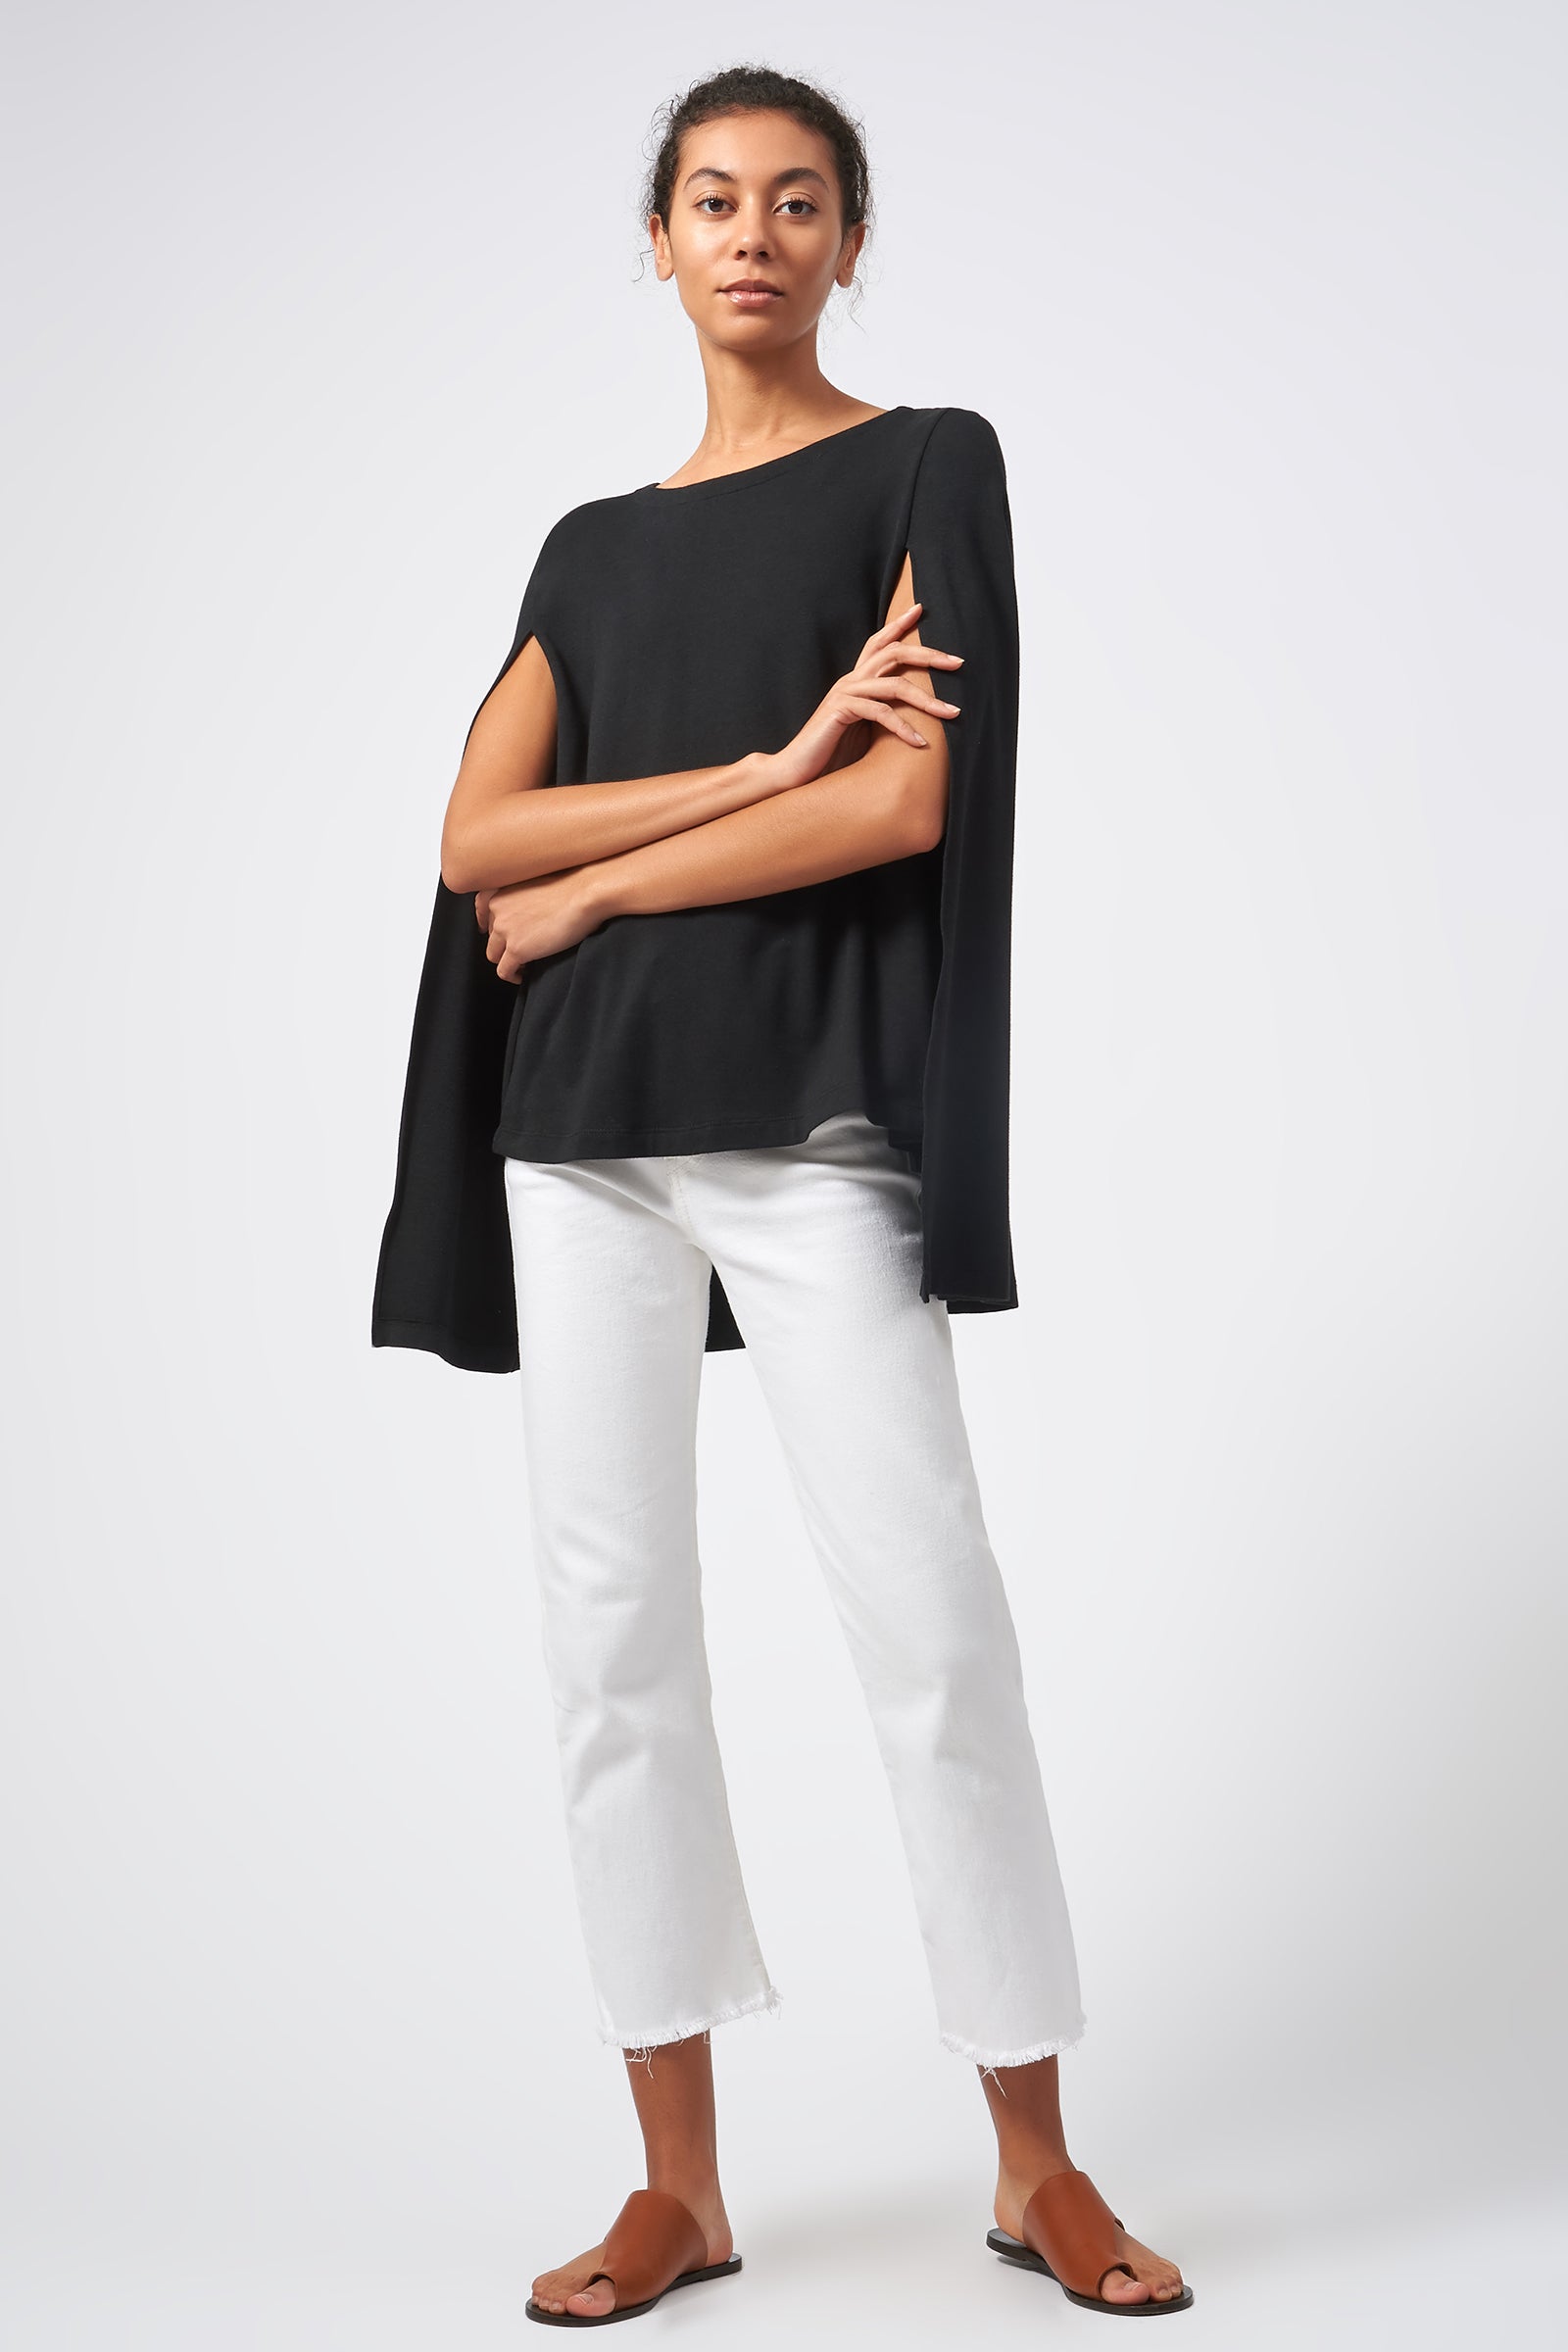 Cape Sweatshirt in Black Made from Bamboo and Cotton French Terry – KAL ...